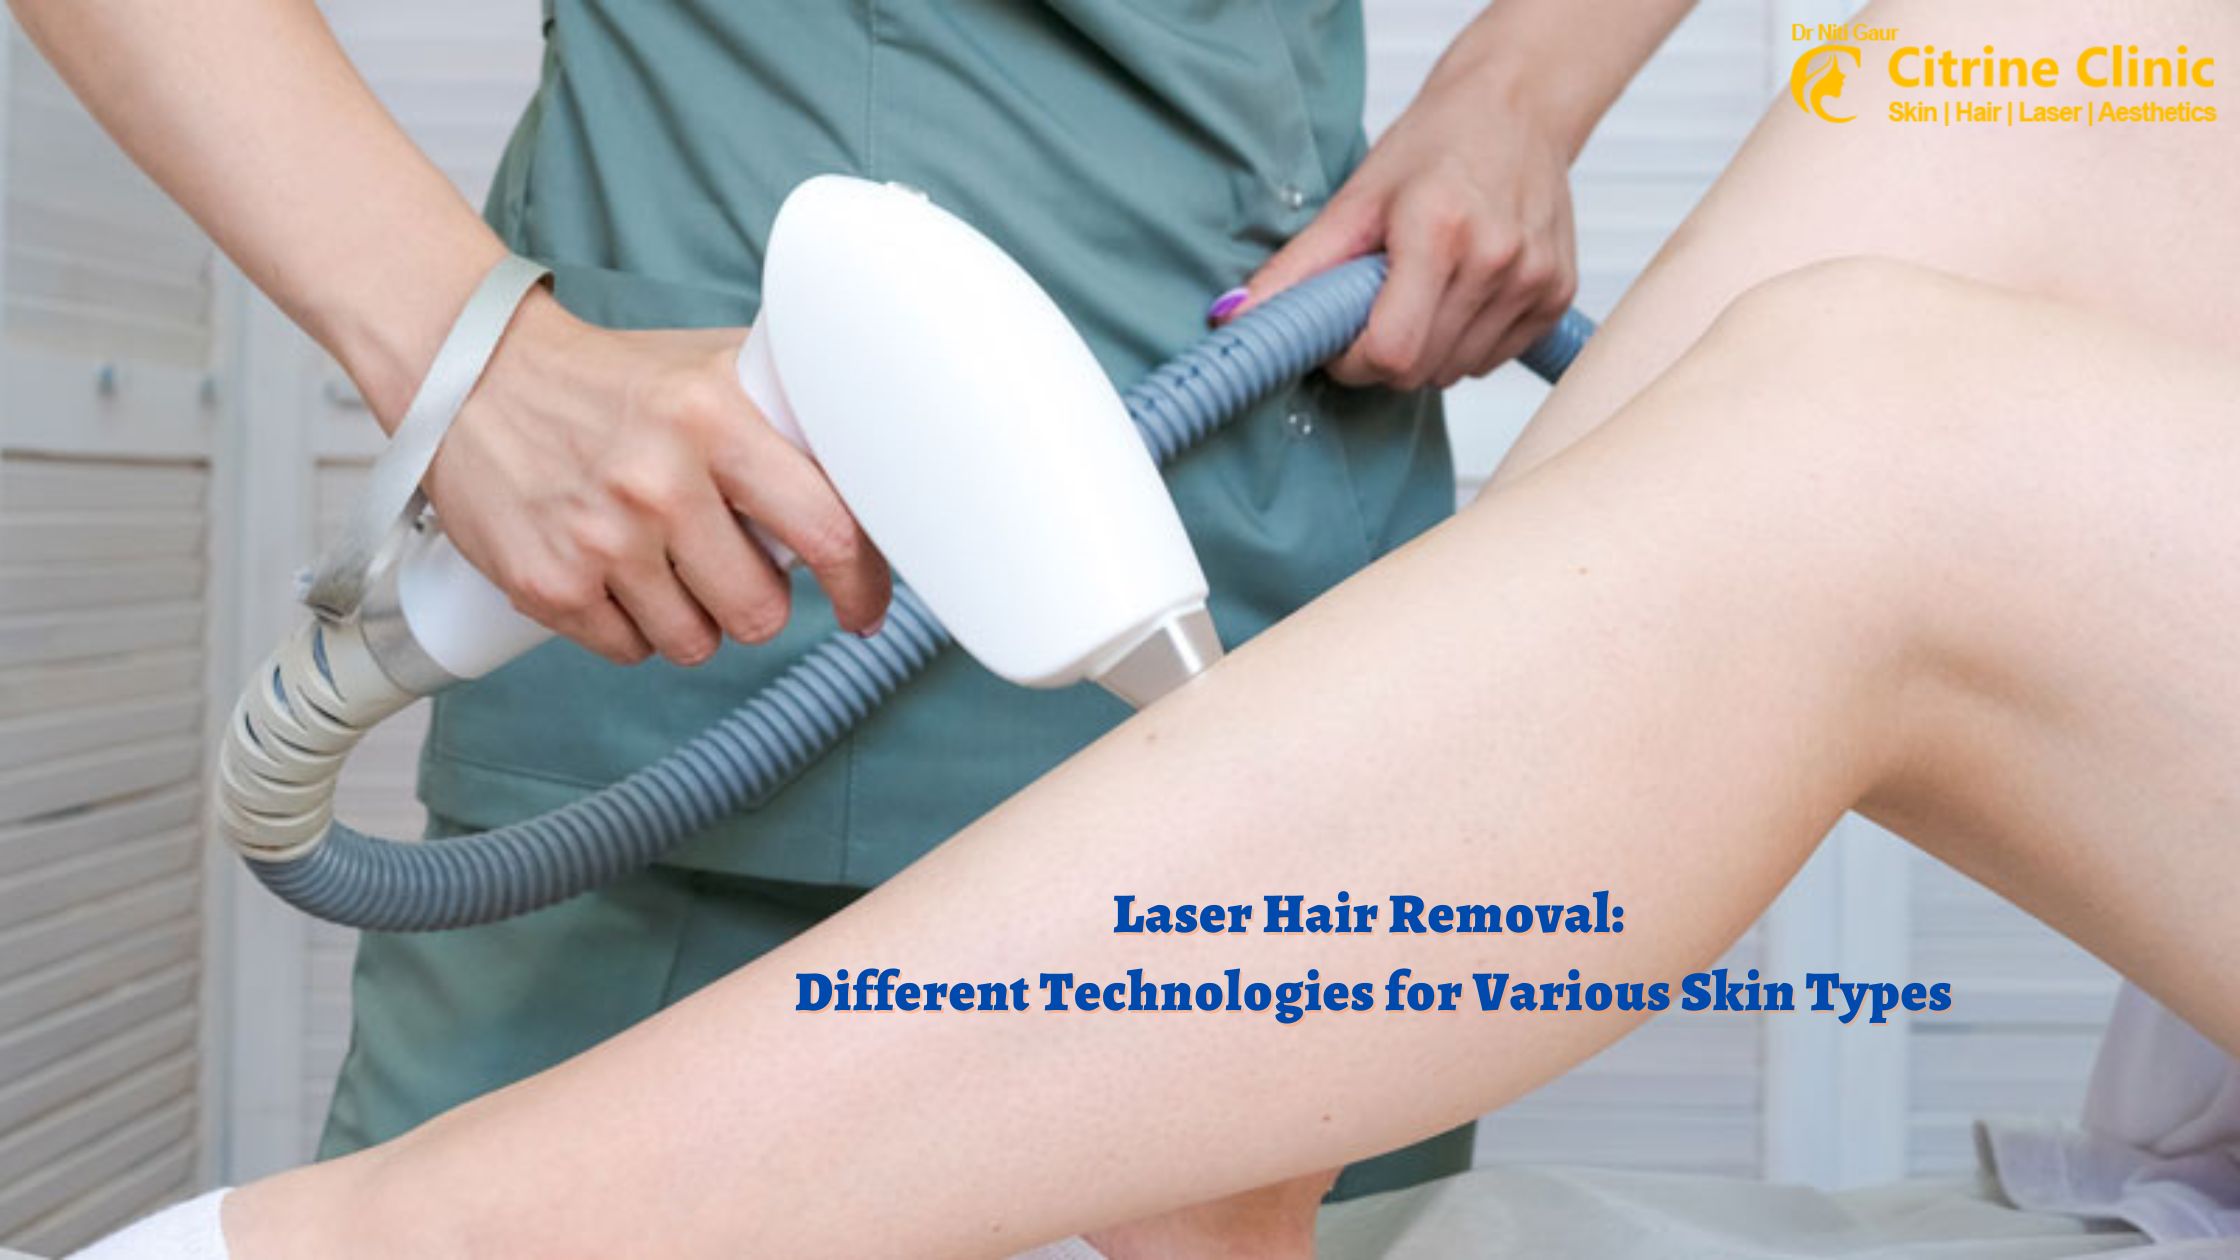 Laser Hair Removal Different Technologies for Various Skin Types